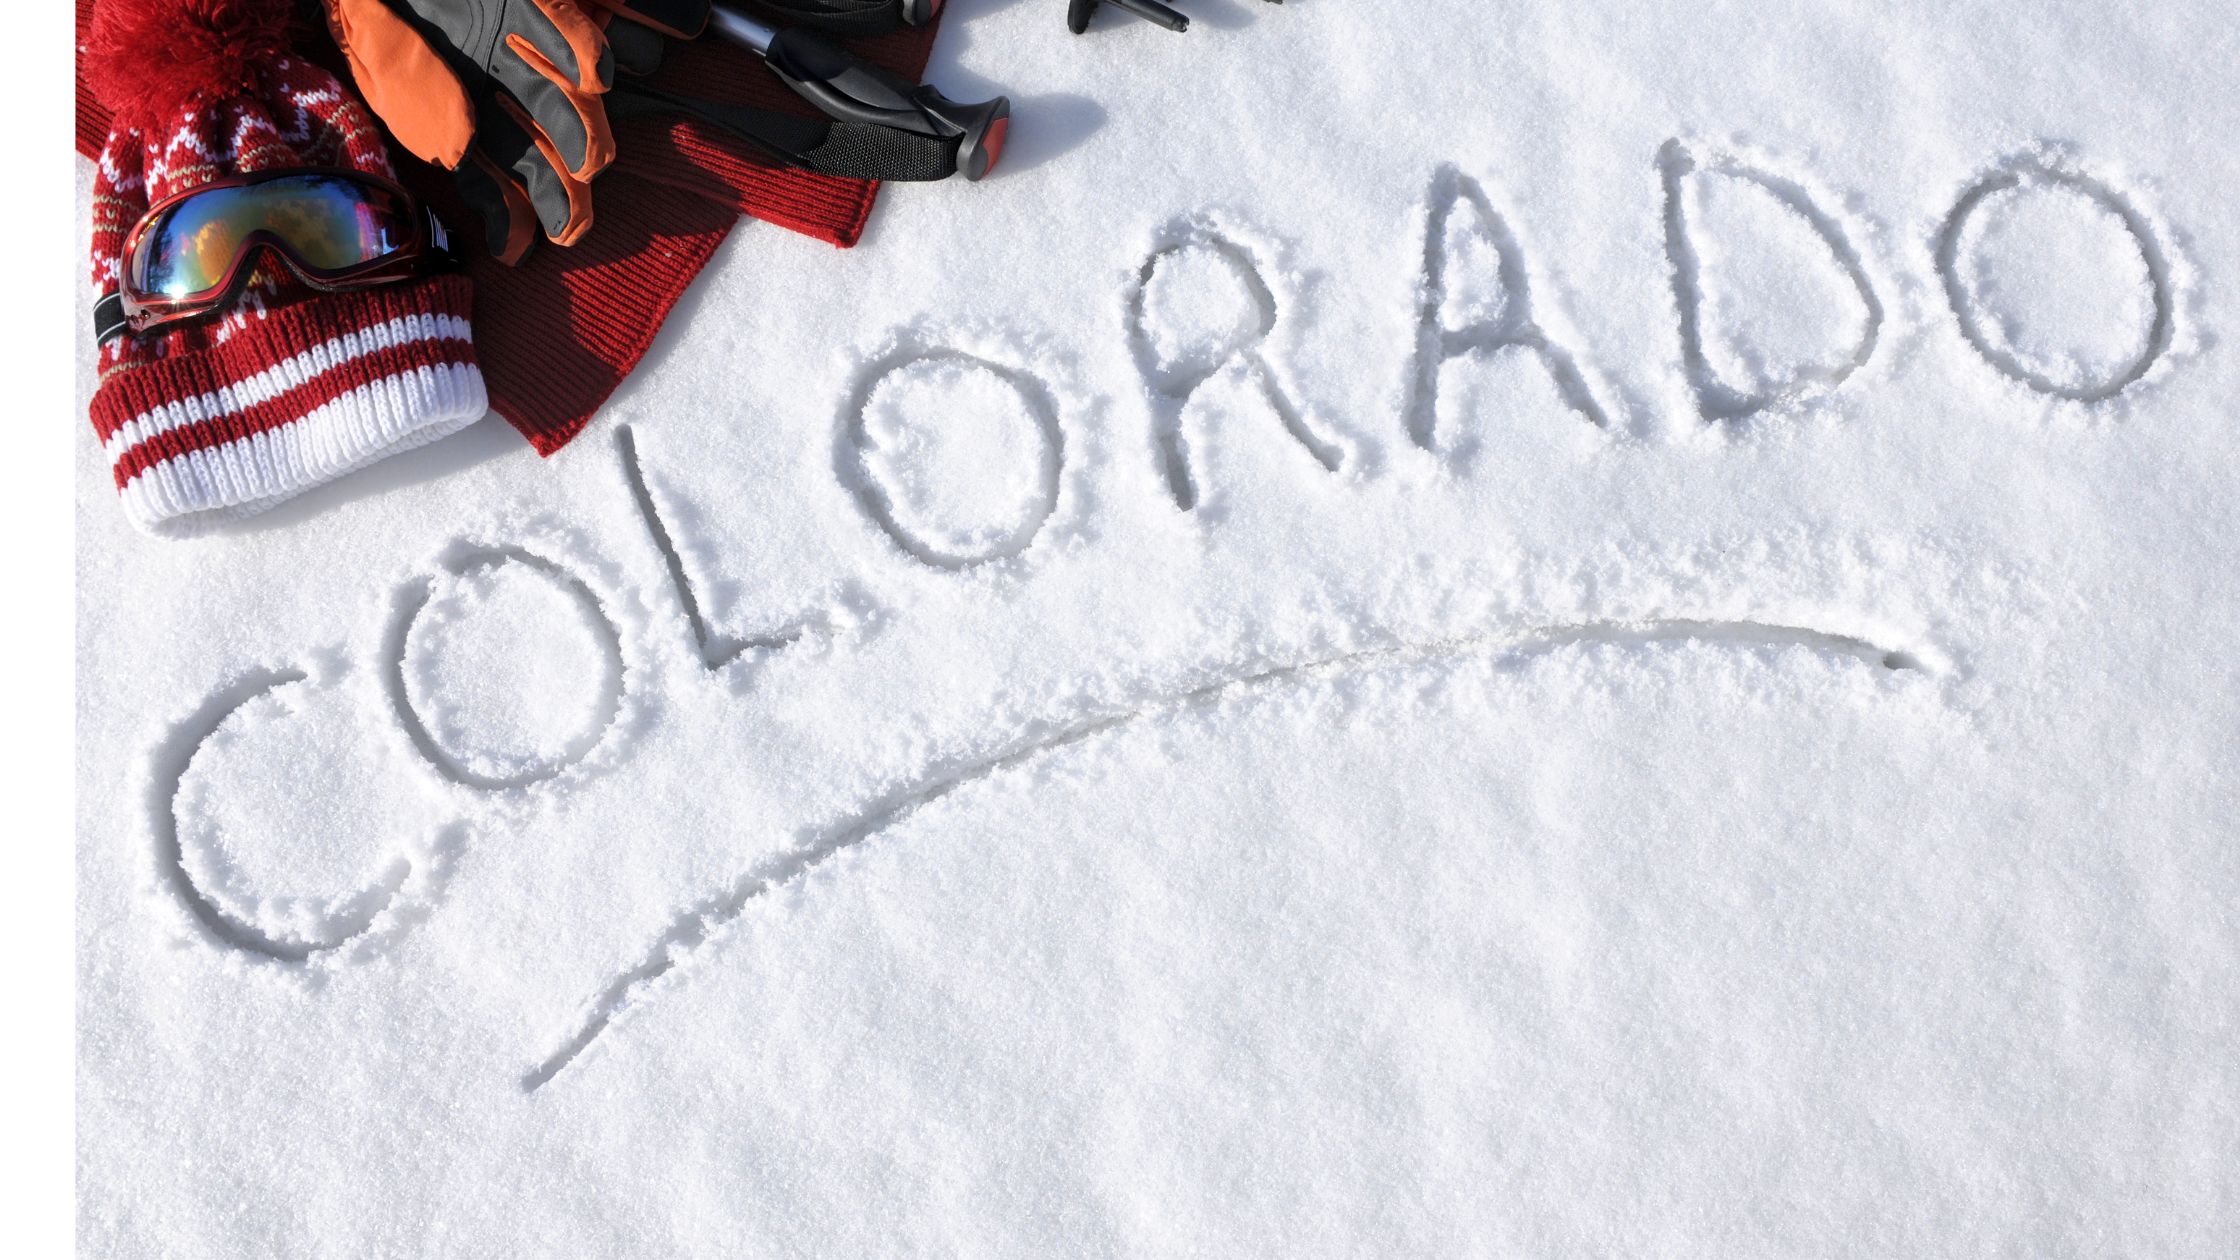 8 Tips for Planning Your Ski Trip to Colorado